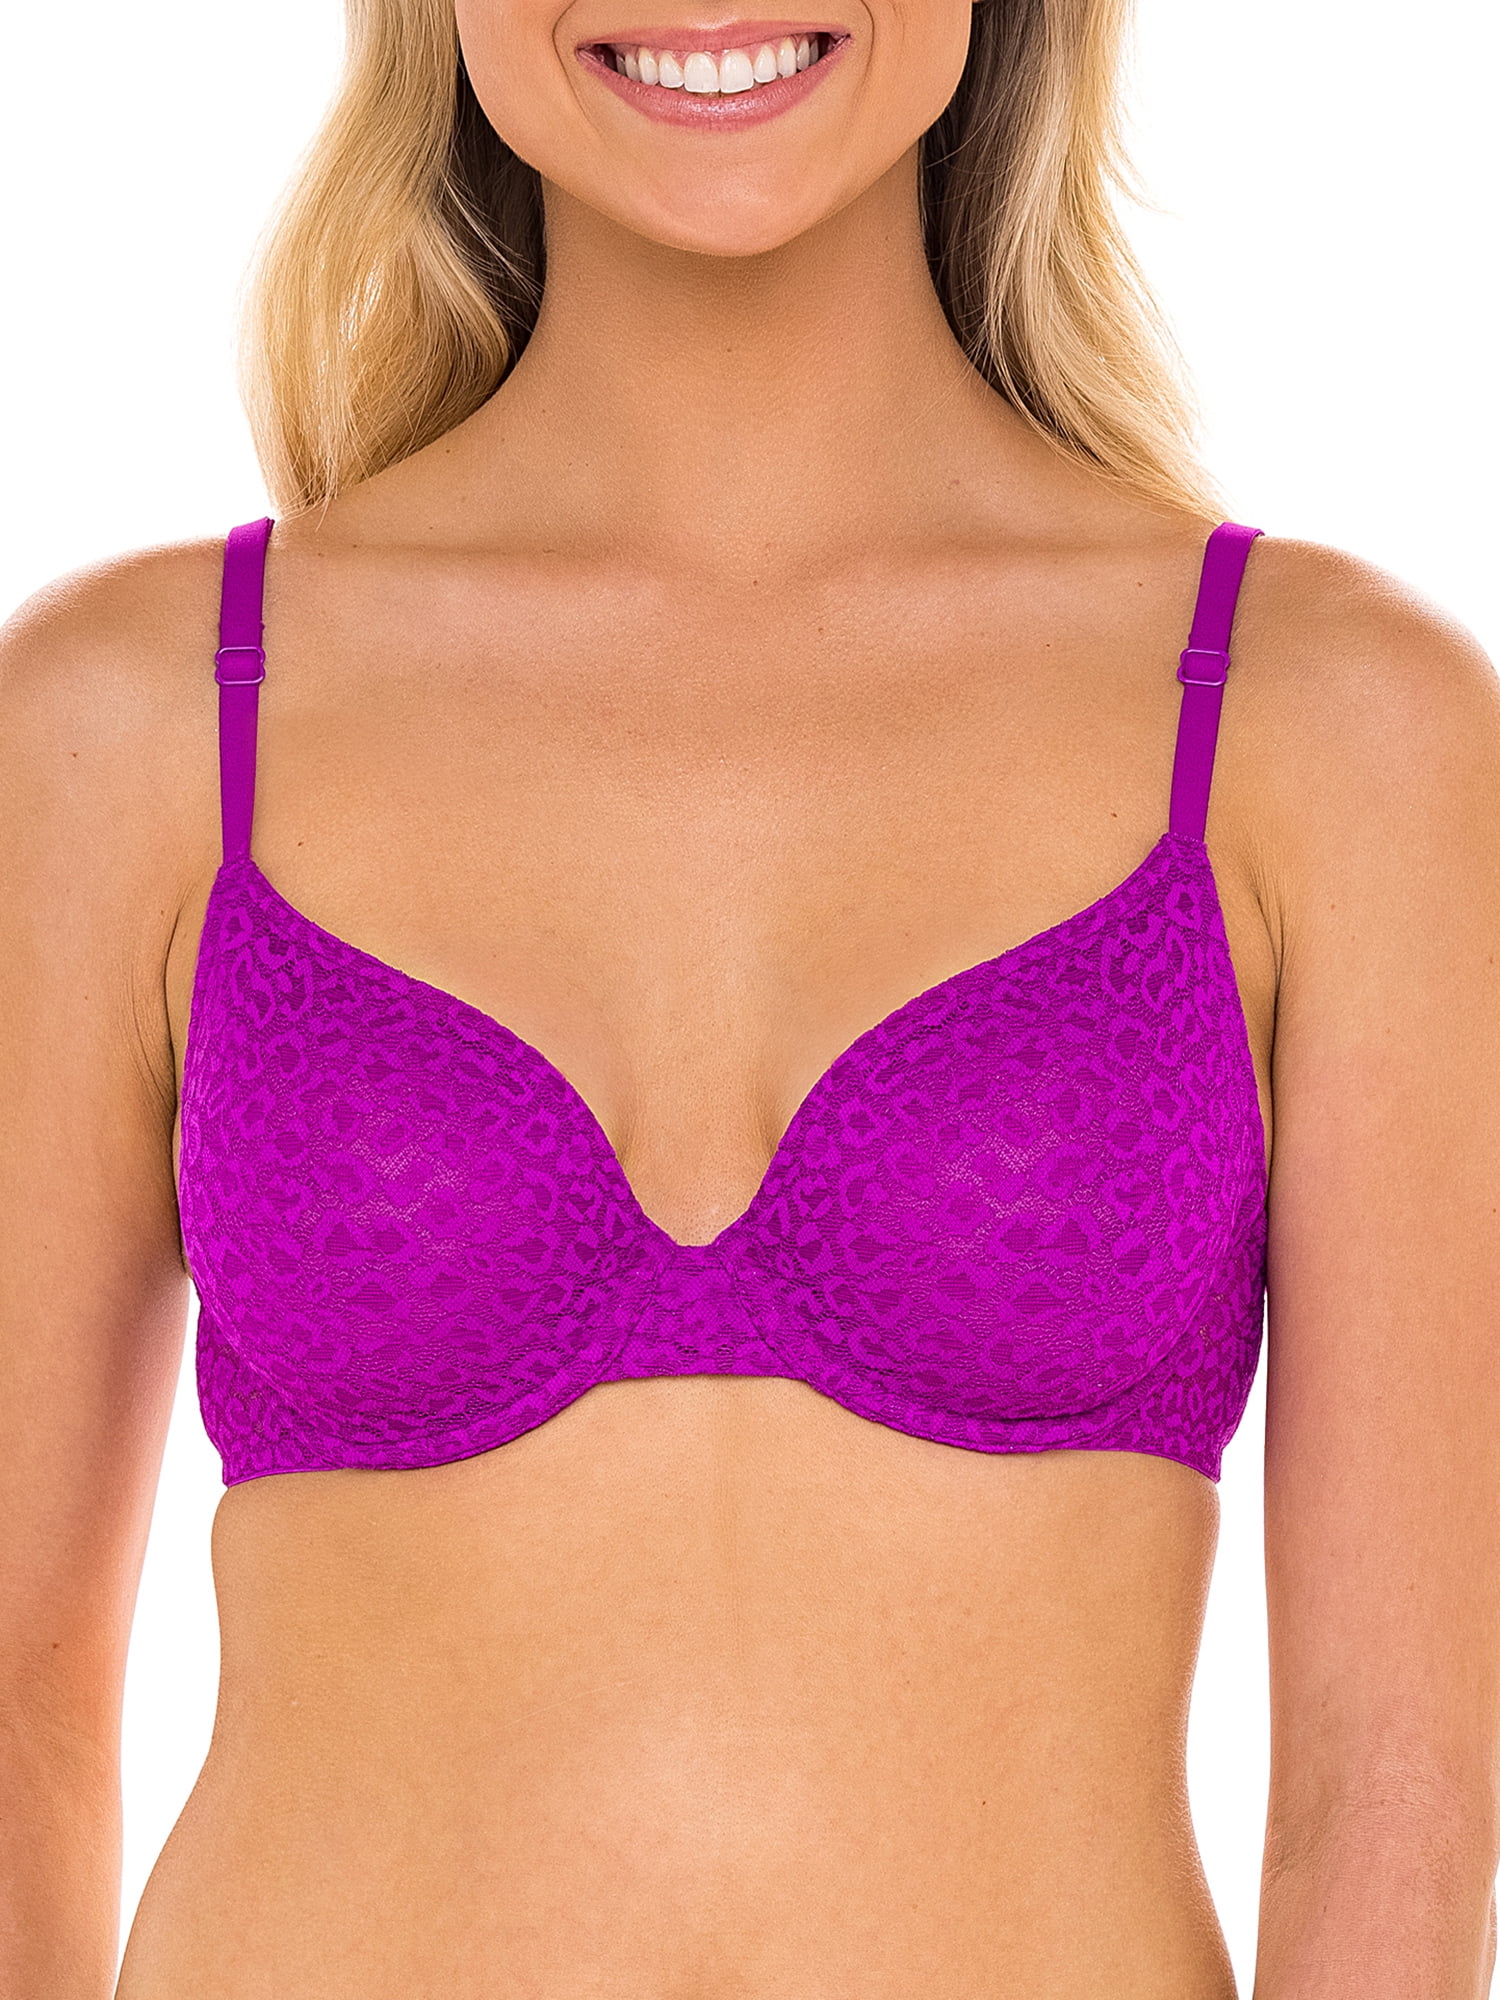 All-Over Lace Unlined Demi Bra